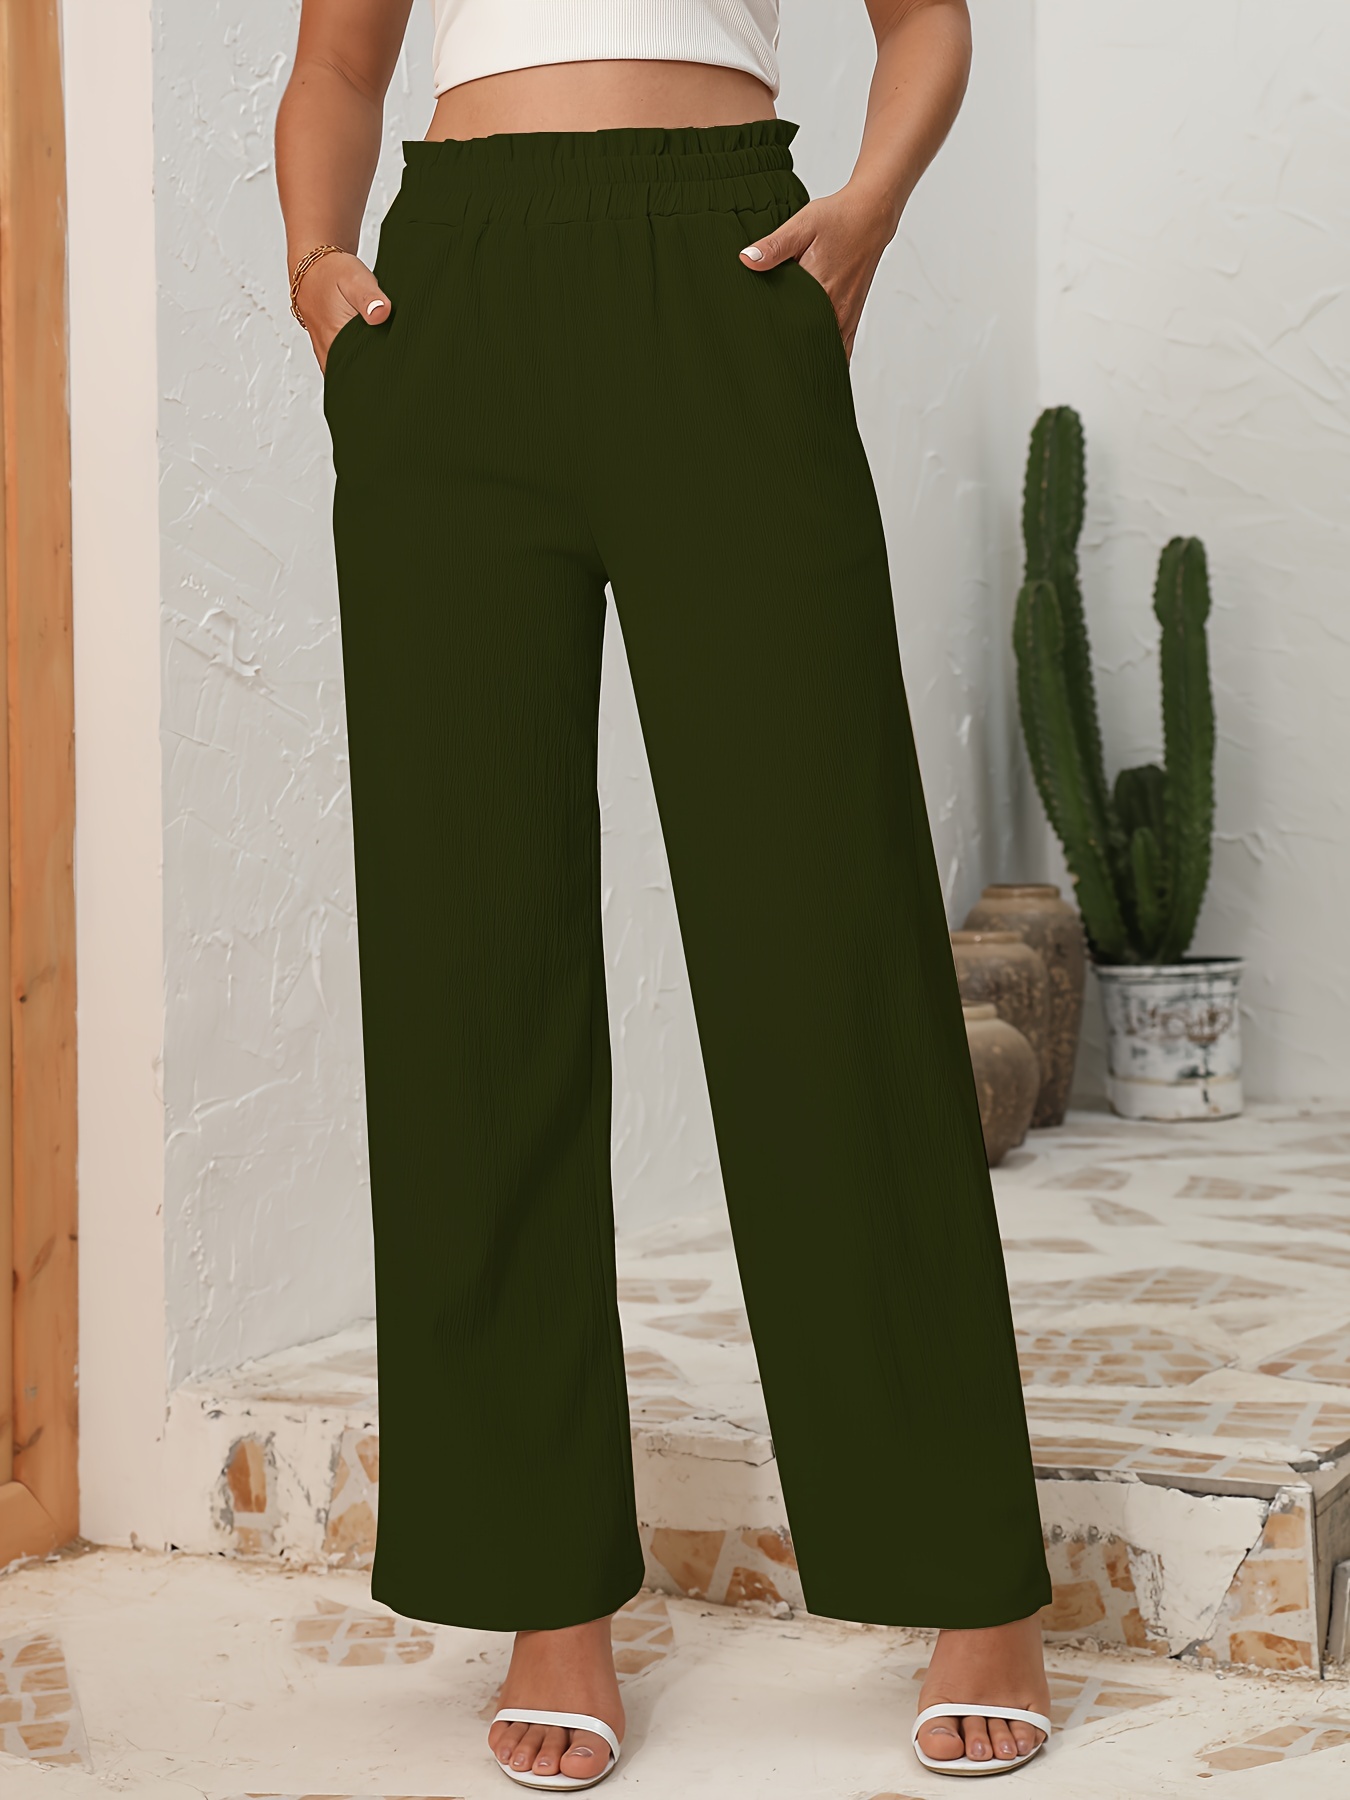 Short Wide Wide Leg Pants for Woman - OI23SN10428288